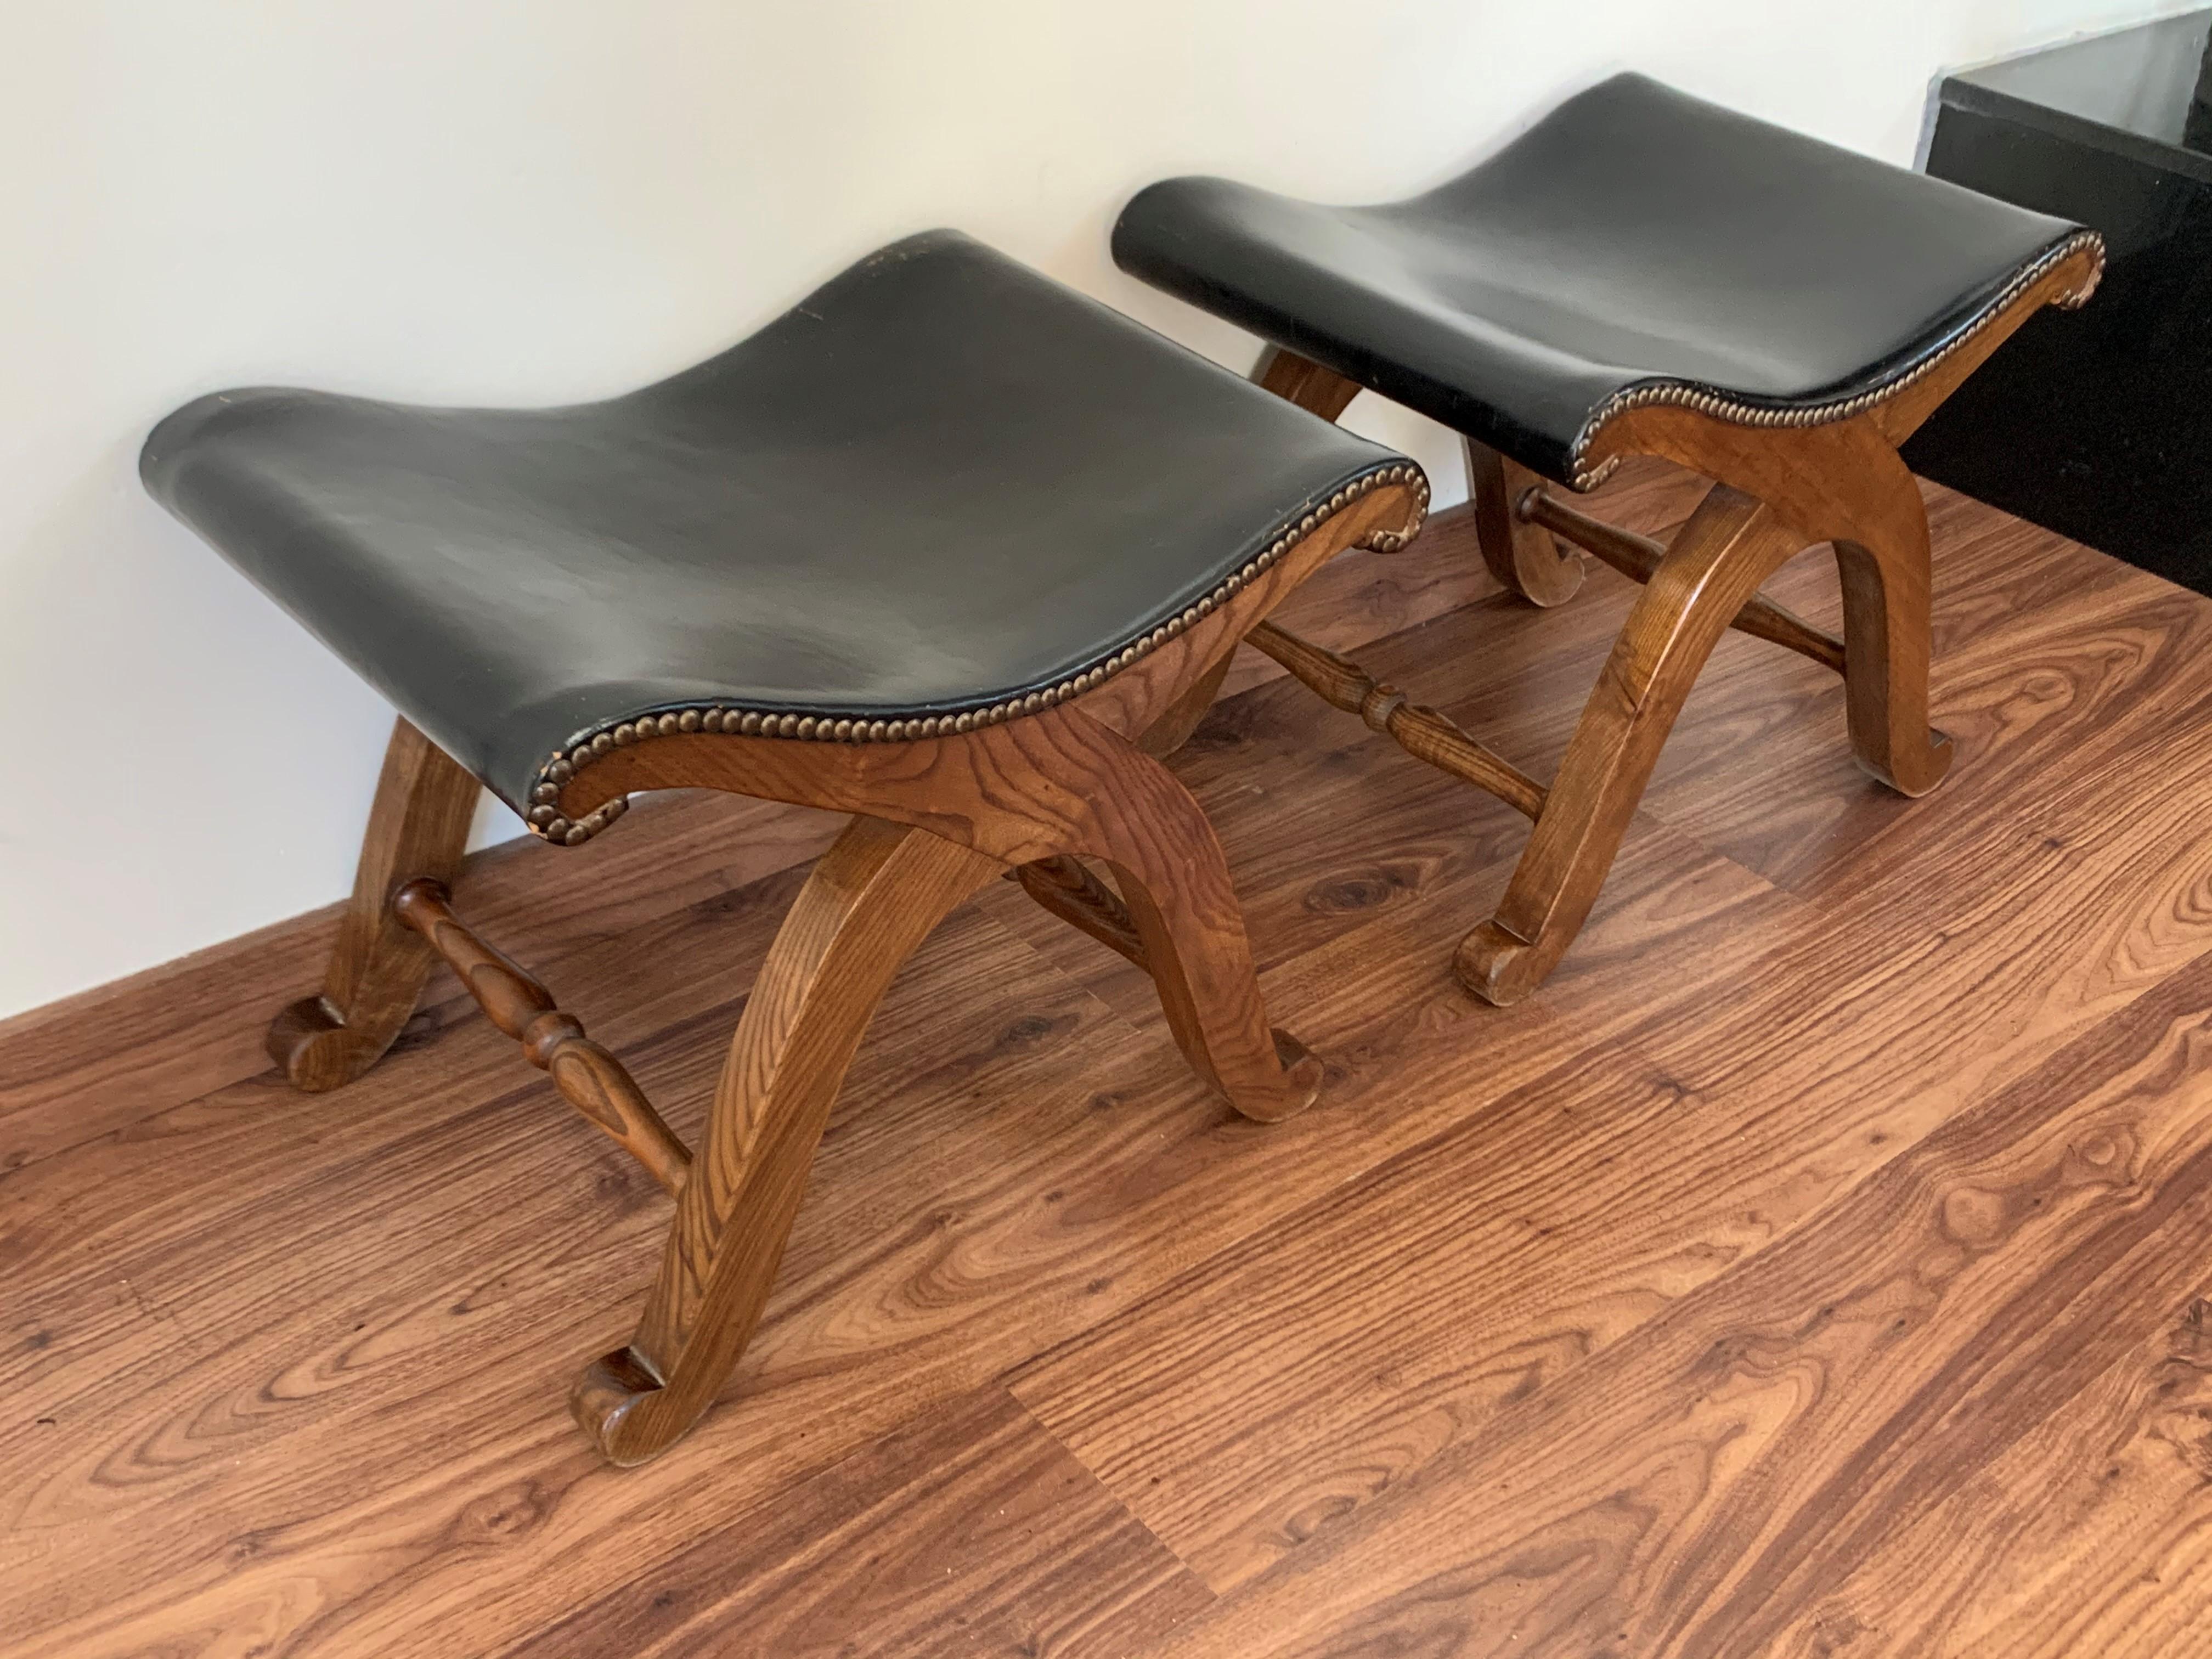 Bronze French Pair of Foot Stools in Walnut and Black Leather Seat with Tacks